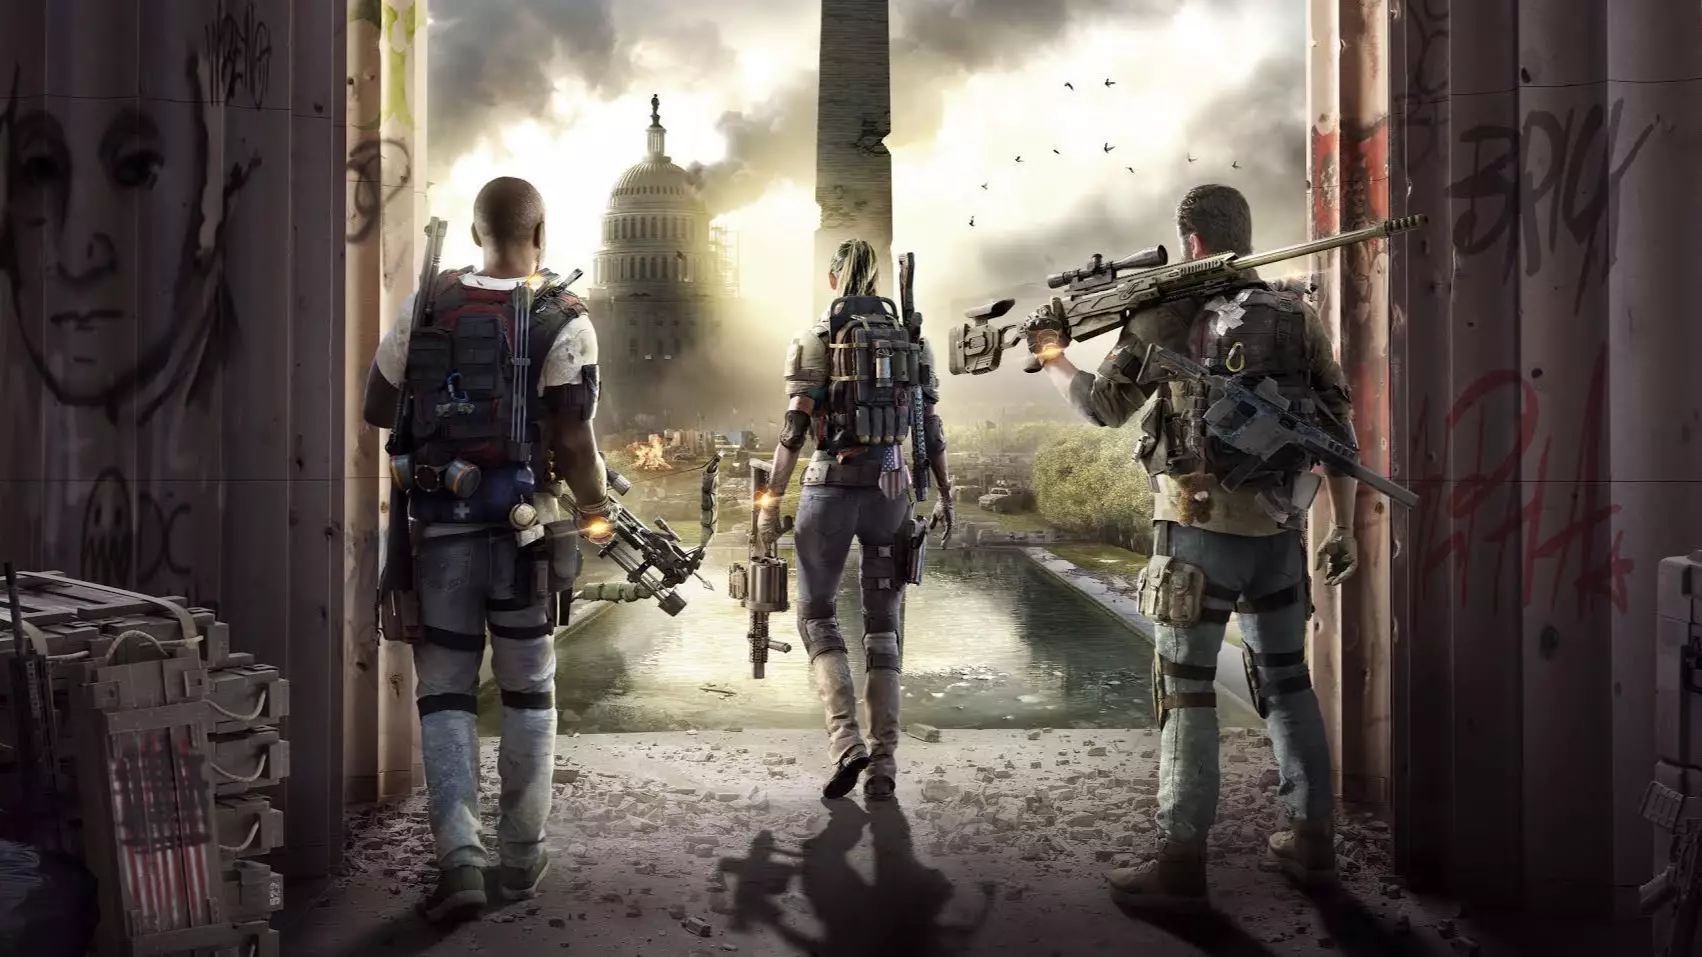 The Division 2 takes place in an abandoned Washington DC